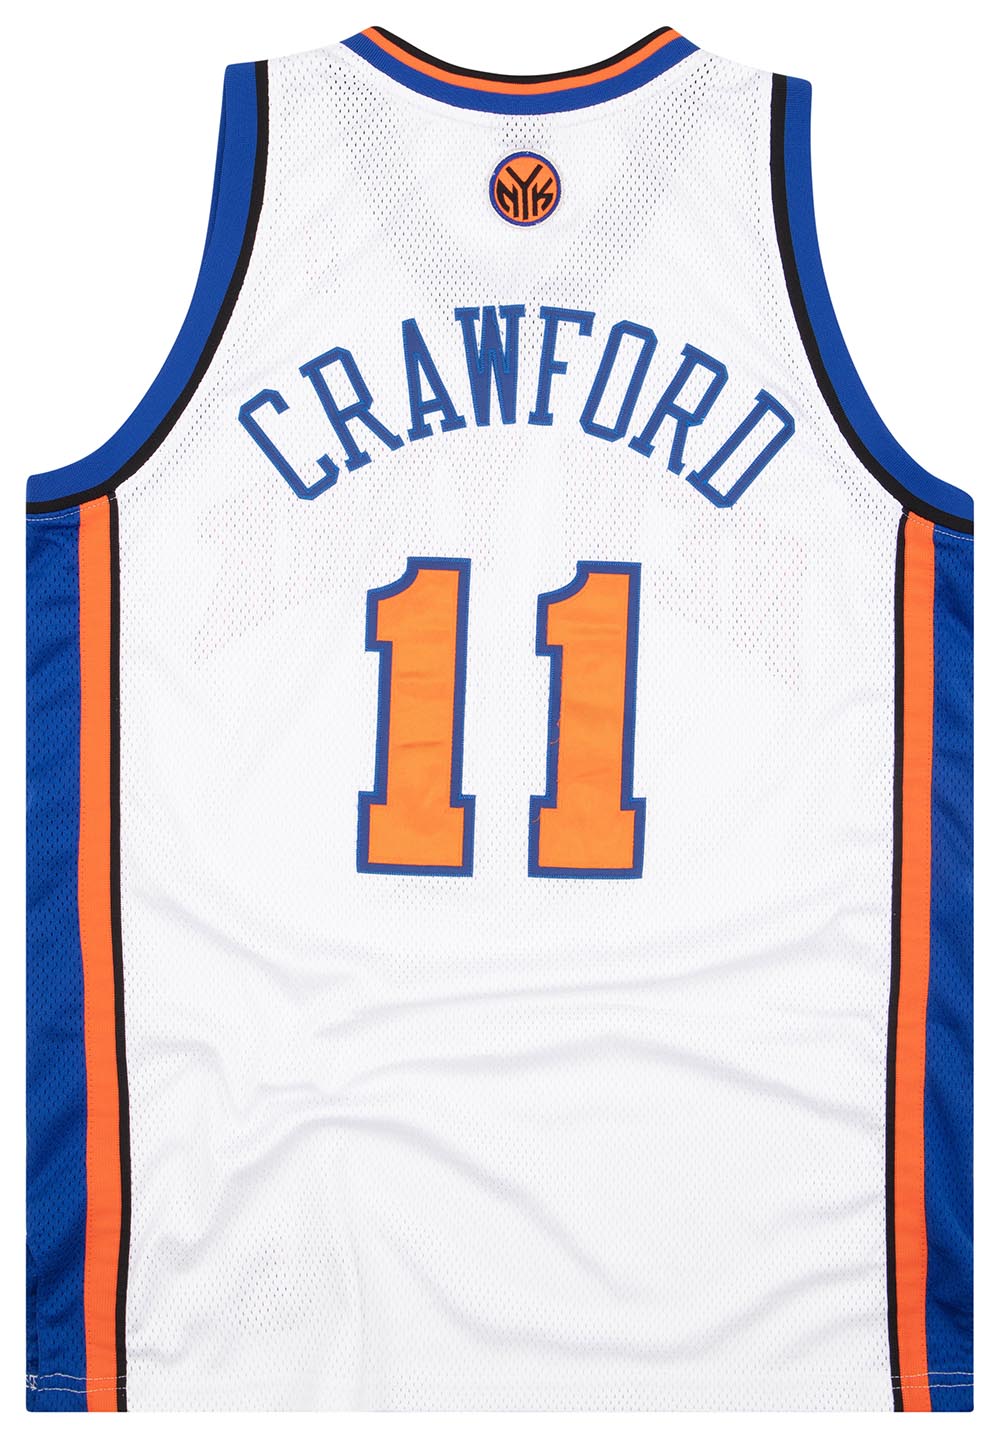 2006-08 AUTHENTIC NEW YORK KNICKS CRAWFORD #11 ADIDAS JERSEY (HOME) L -  Classic American Sports